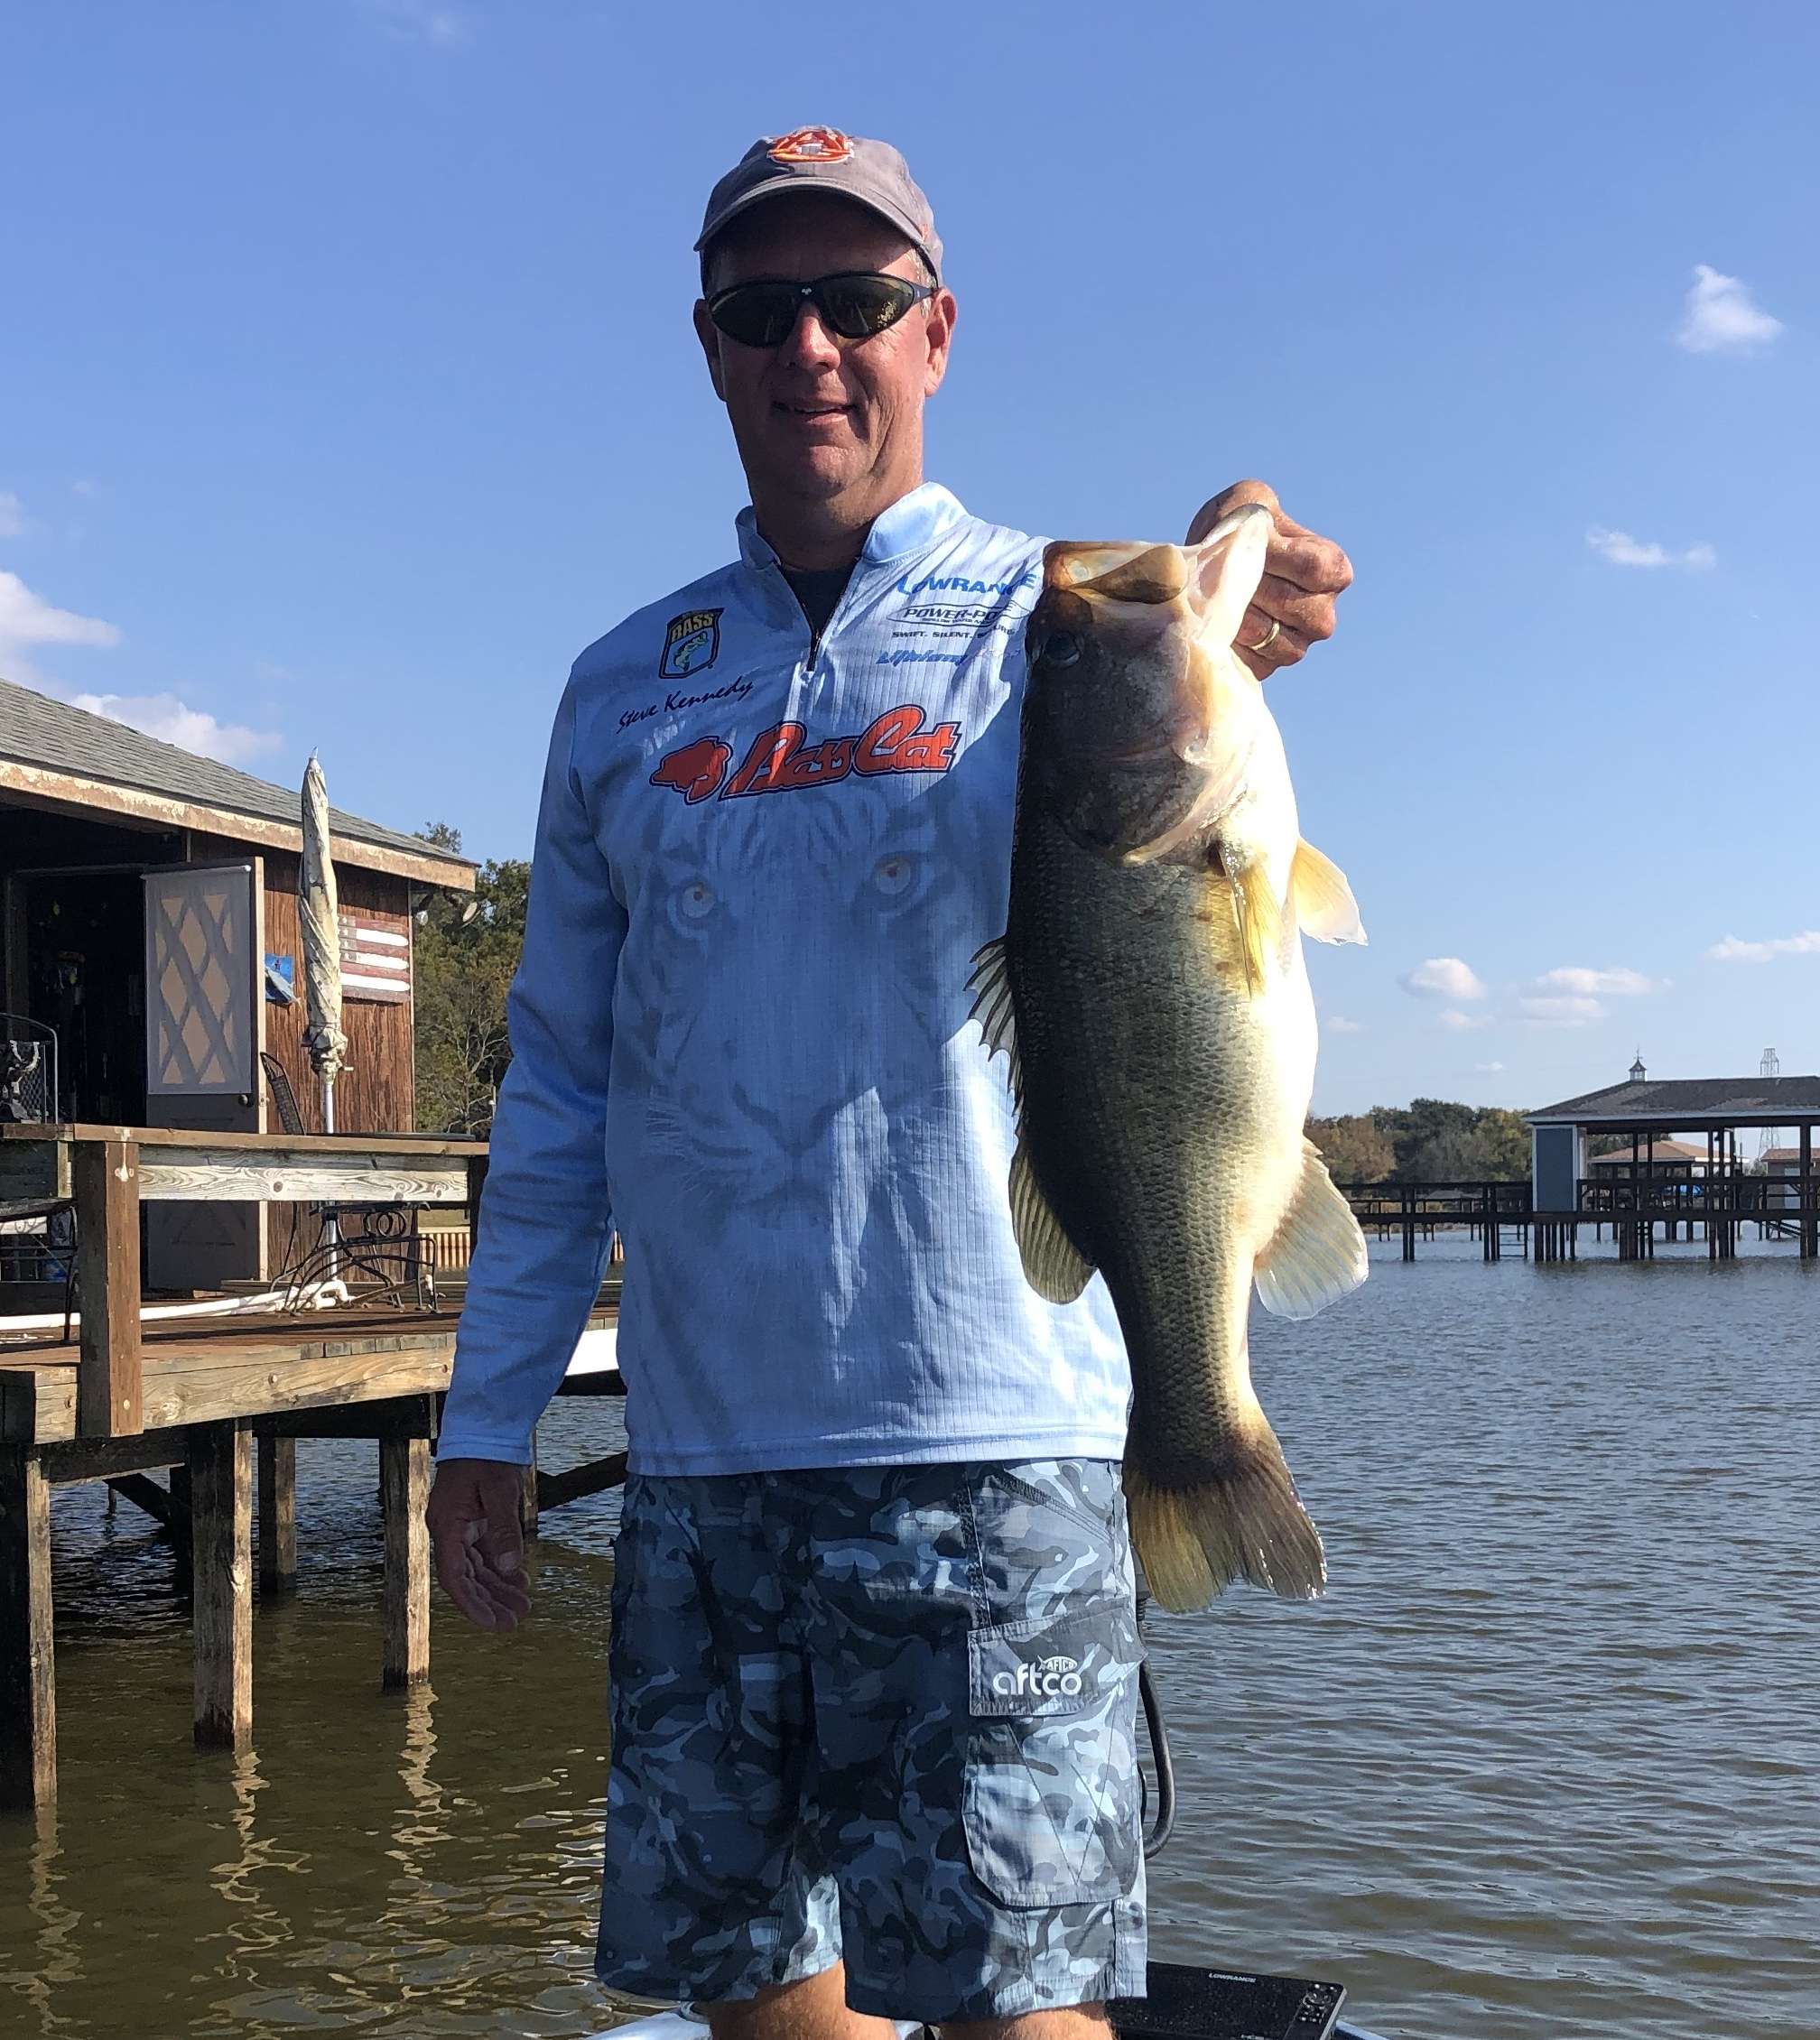 Day 2 of the 2020 Toyota Bassmaster Texas Fest benefiting Texas Parks and Wildlife Department!  Judge photos are flying in to keep you up to date with those g-g-g-giant bass being caught on Lake Fork!